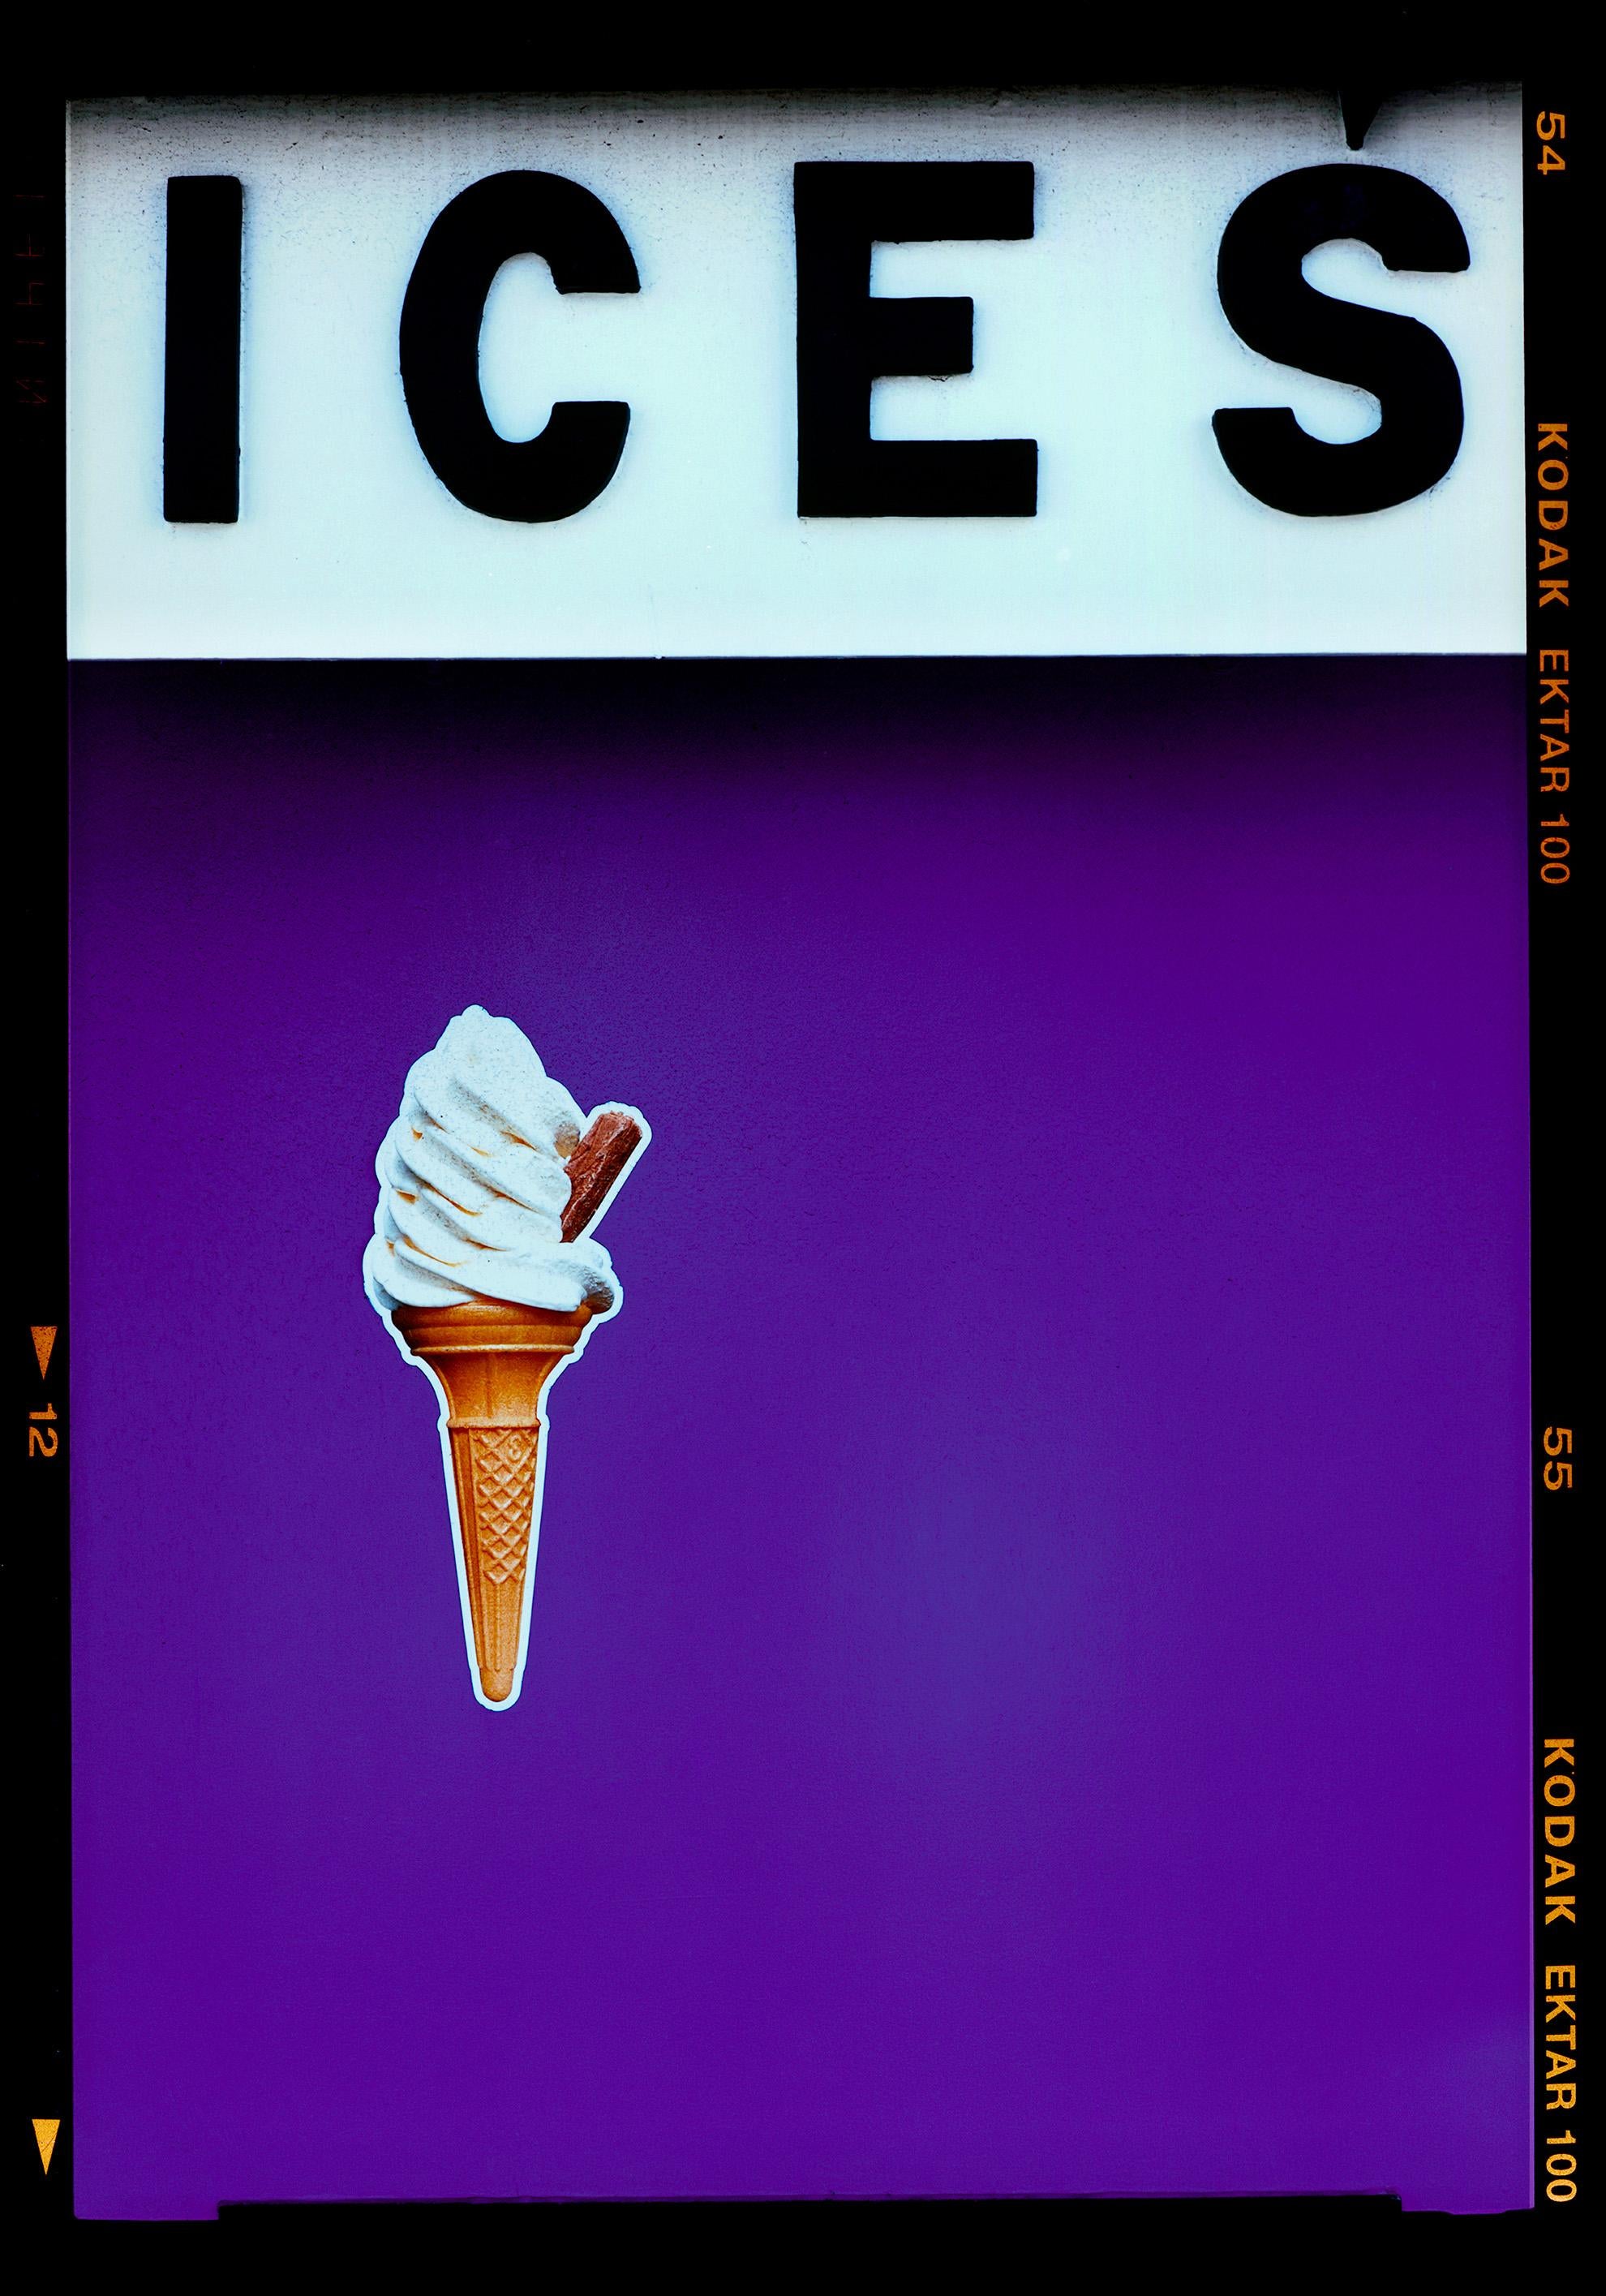 Richard Heeps Color Photograph - Ices (Purple), Bexhill-on-Sea - British seaside color photography